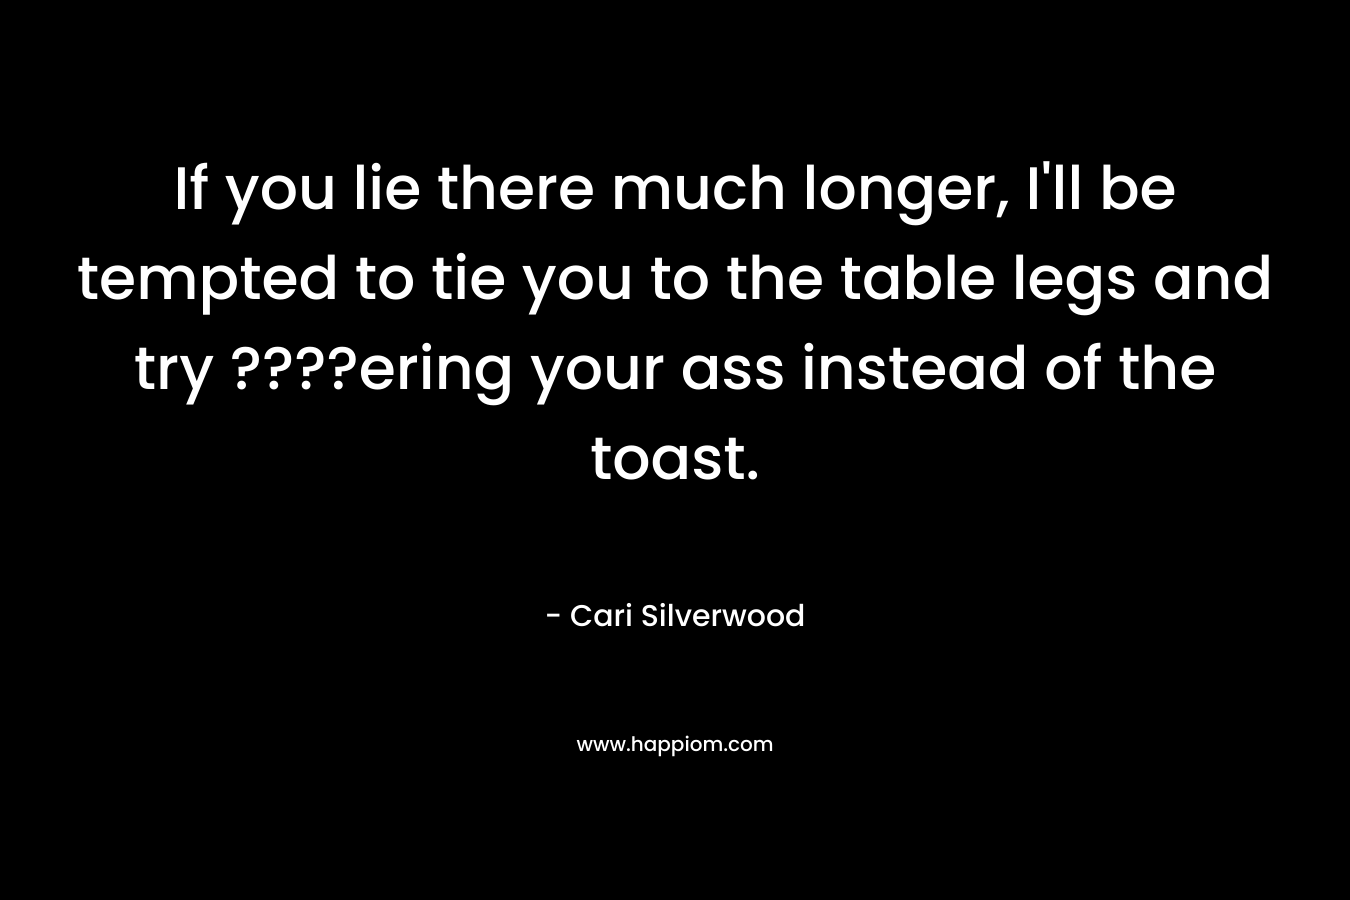 If you lie there much longer, I’ll be tempted to tie you to the table legs and try ????ering your ass instead of the toast. – Cari Silverwood